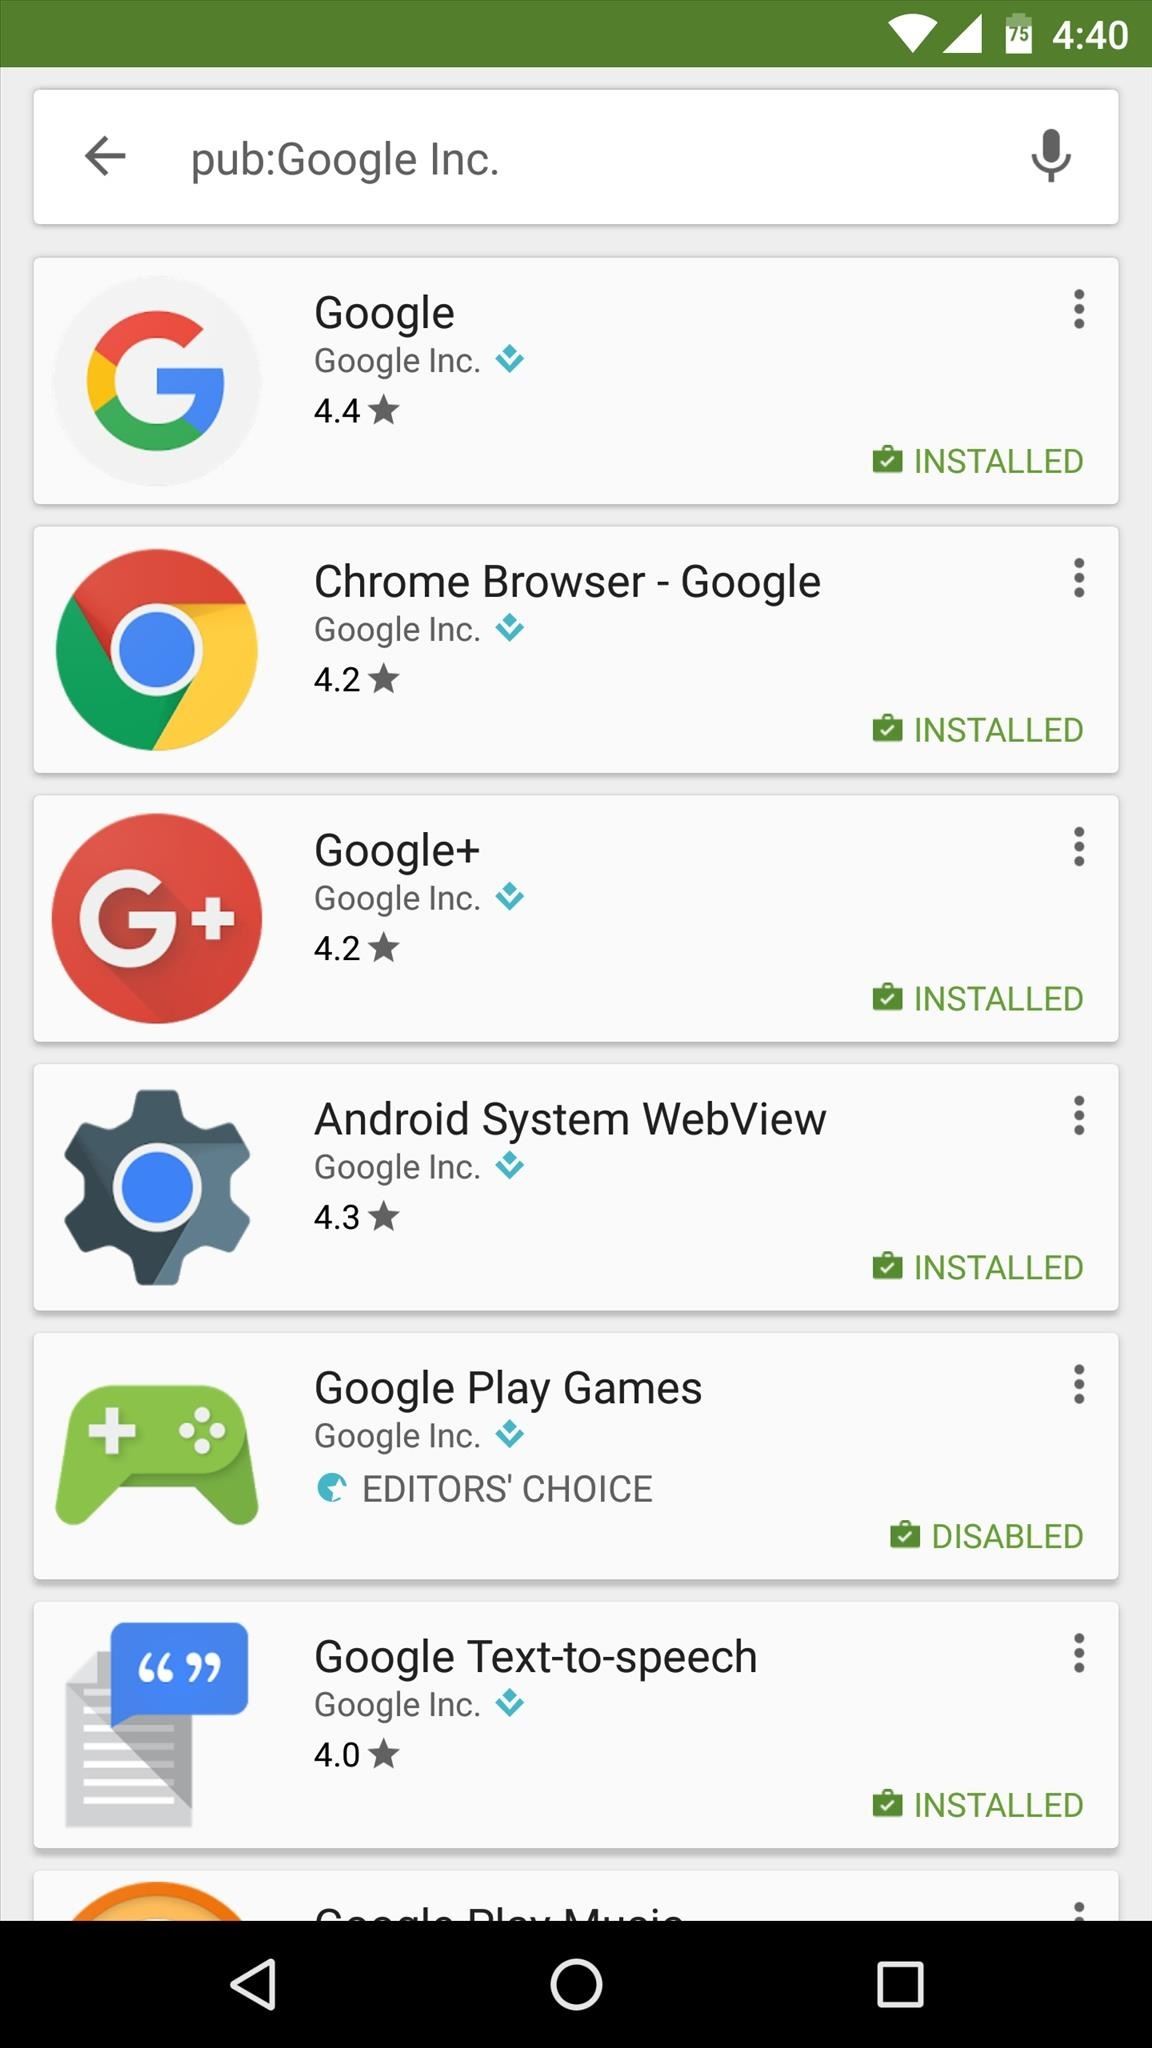 5 Things You Can Do on the Play Store You Didn't Know About